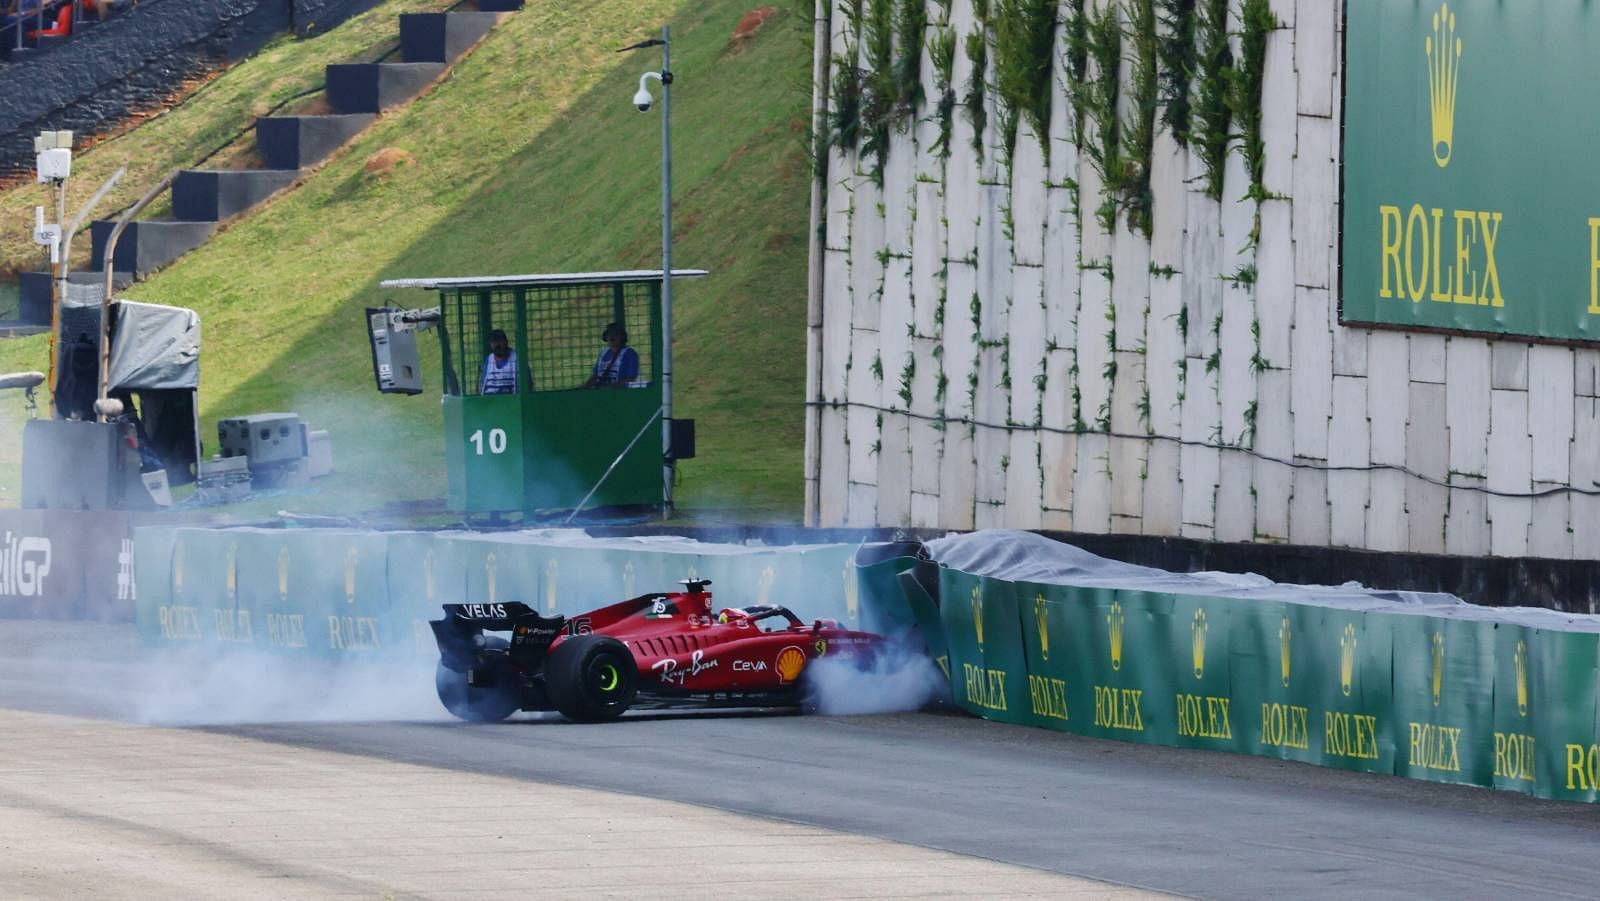 Charles Leclerc fought back from the colision to finish P4 in the race